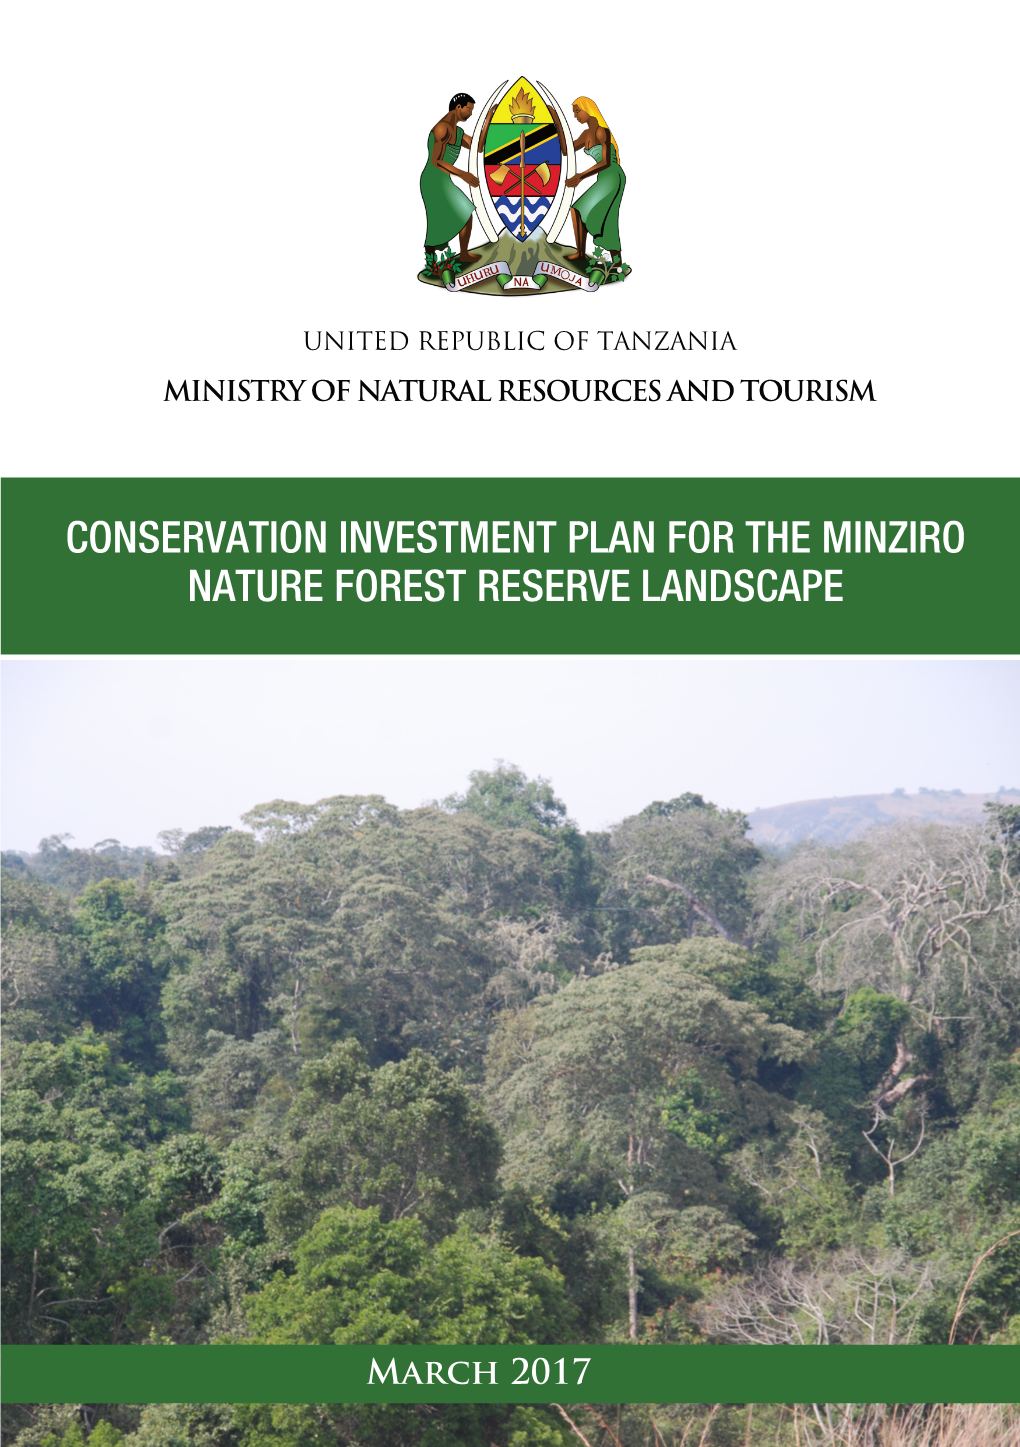 Conservation Investment Plan for the Minziro Nature Forest Reserve Landscape